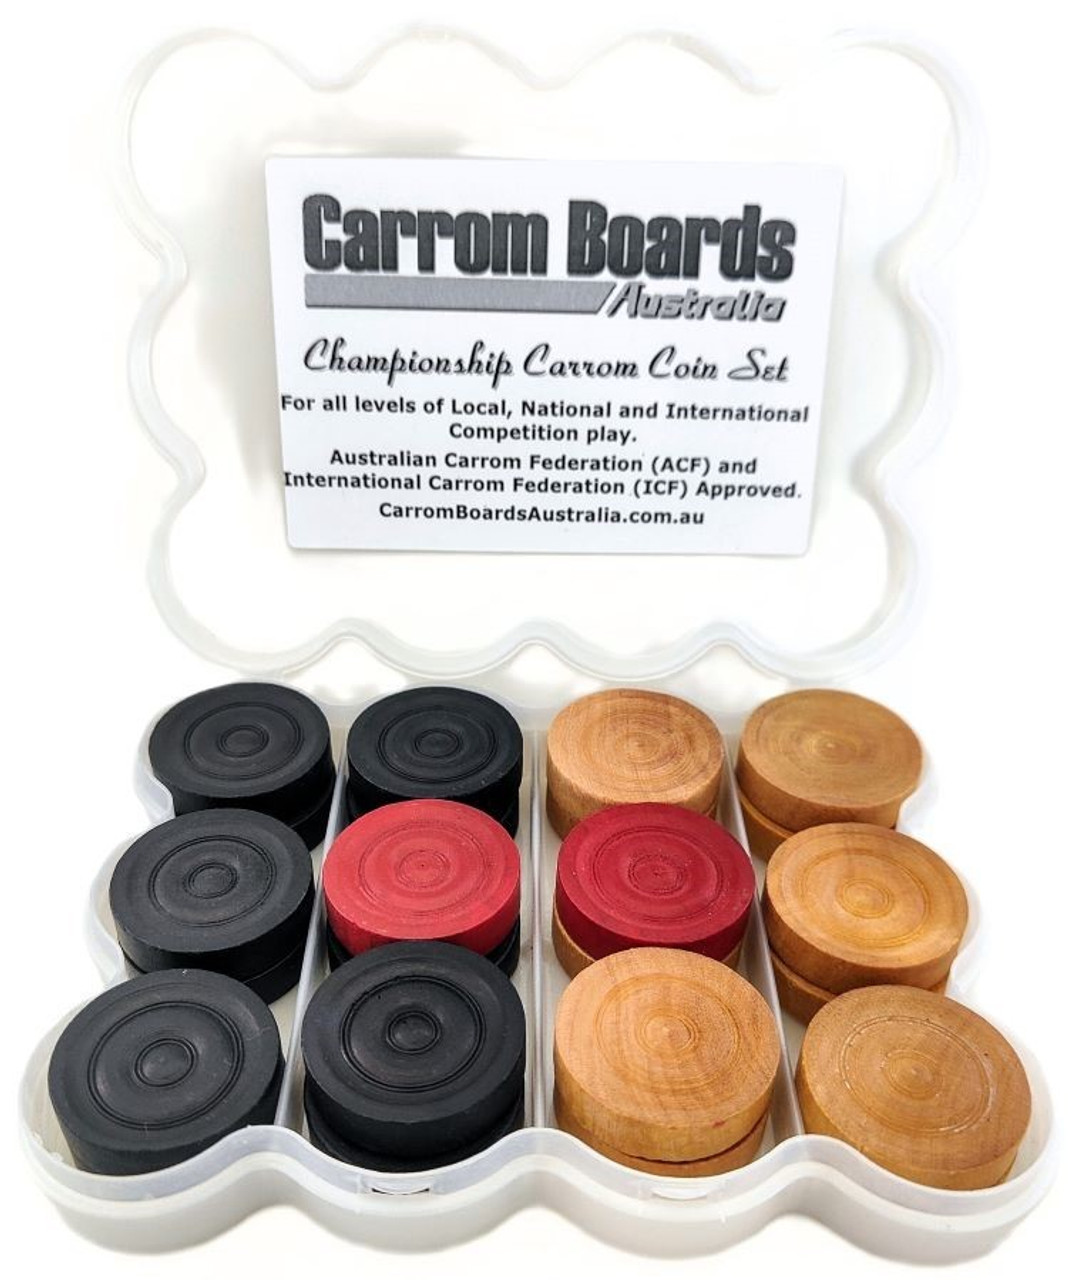 Championship Carrom Coin TWO SETS Regulation Approved PLUS FREE OFFERS